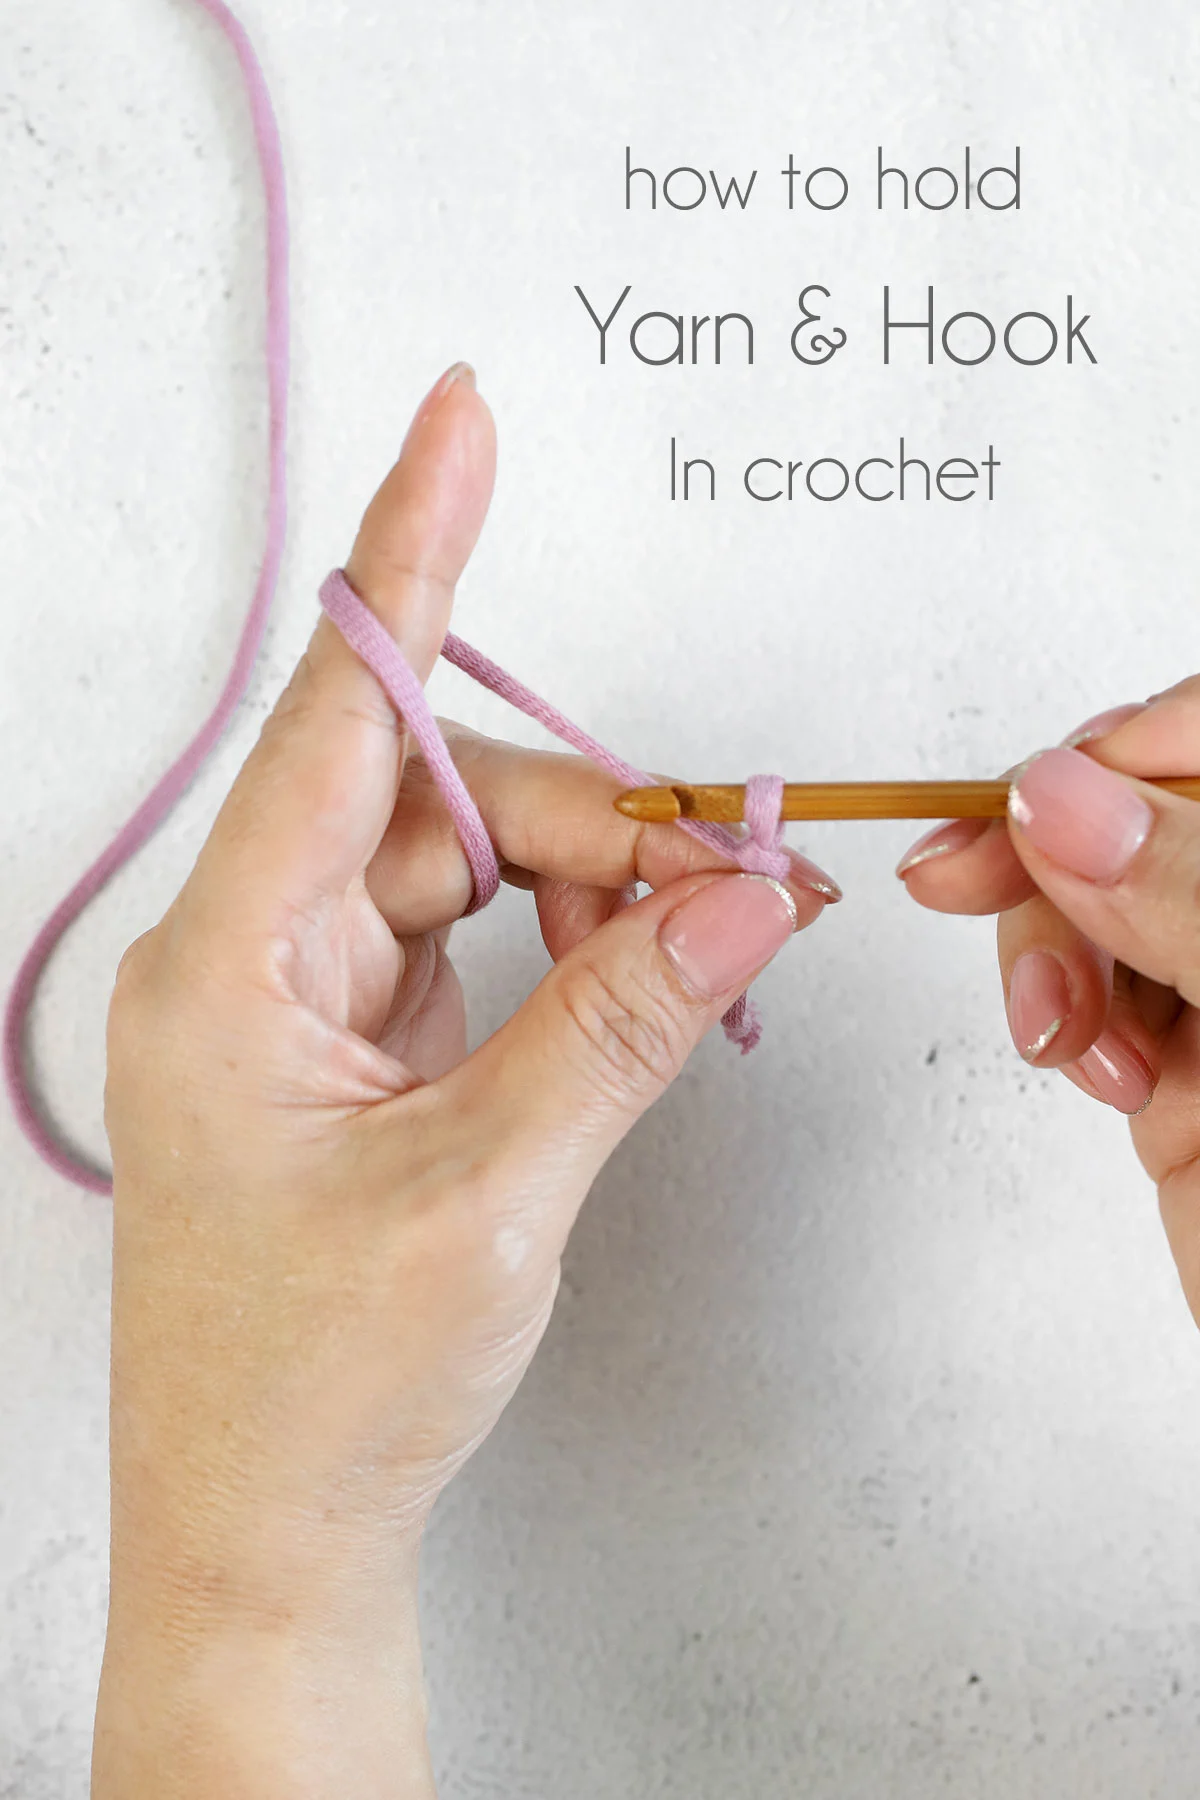 Is there some kind of finger protector for holding the yarn